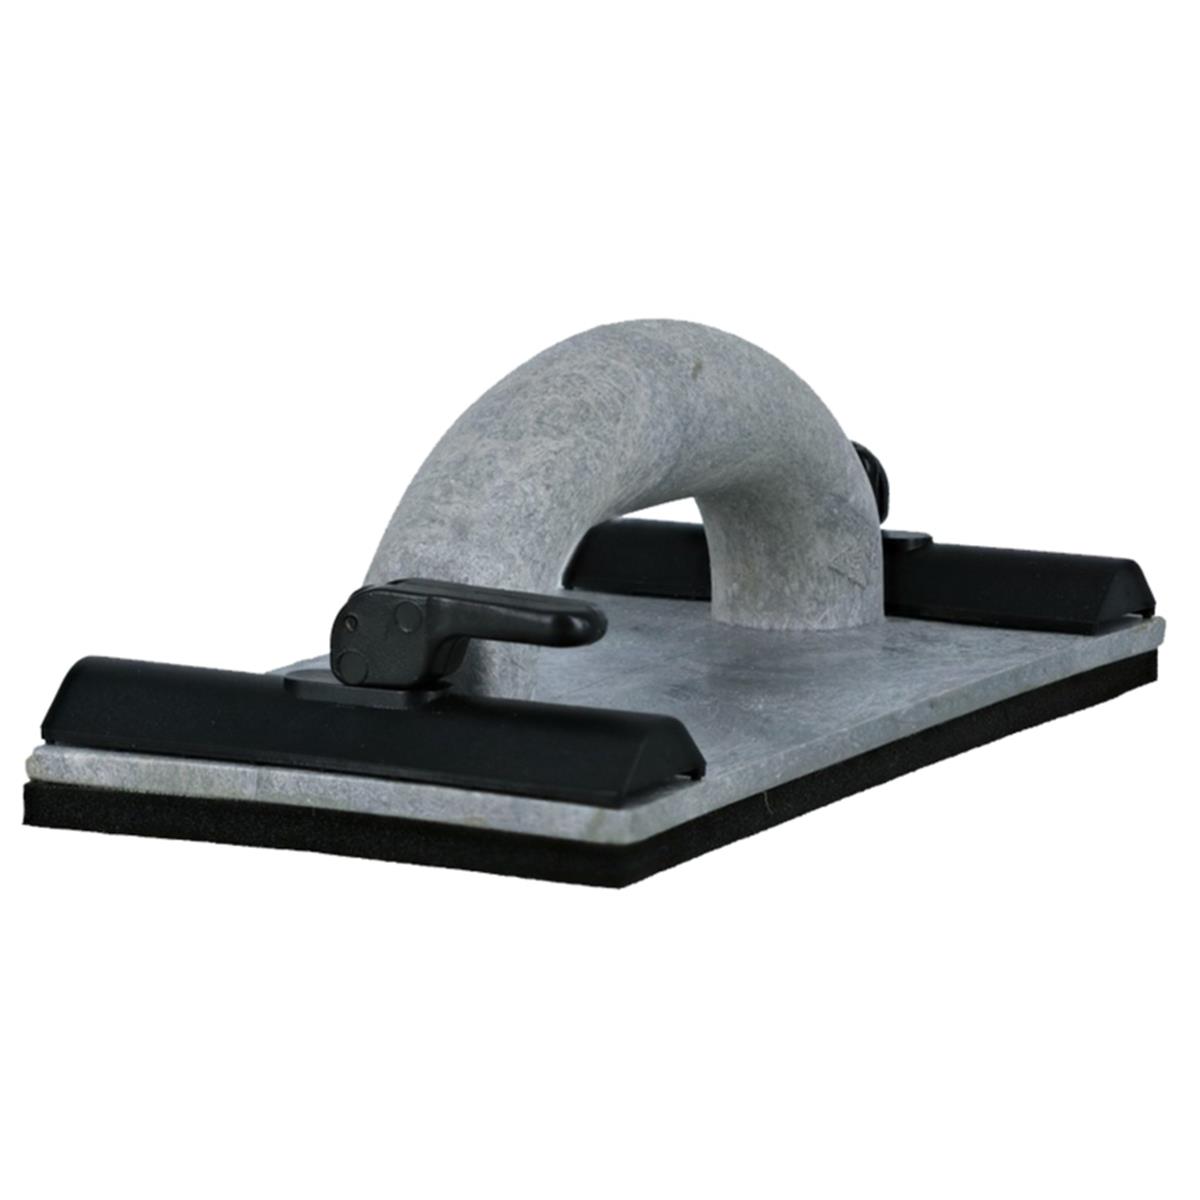 Picture of Freud America 1001938 7 x 3.66 in. Sheet Hand Sander - 0.33 in.